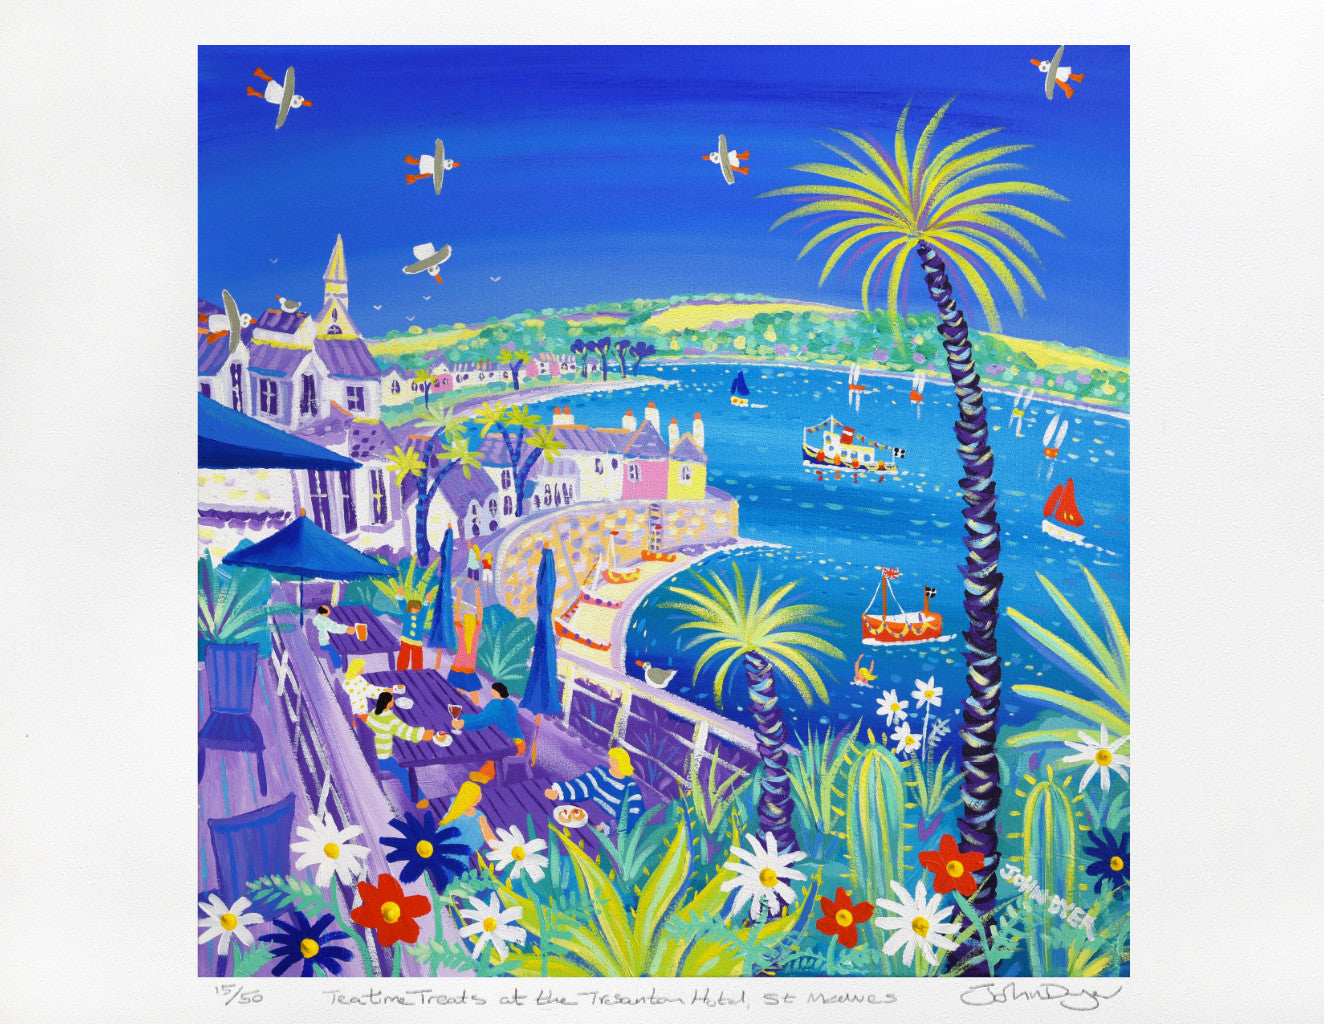 Tresanton Hotel terrace looking towards St Mawes in Cornwall. Signed print by artist John Dyer.